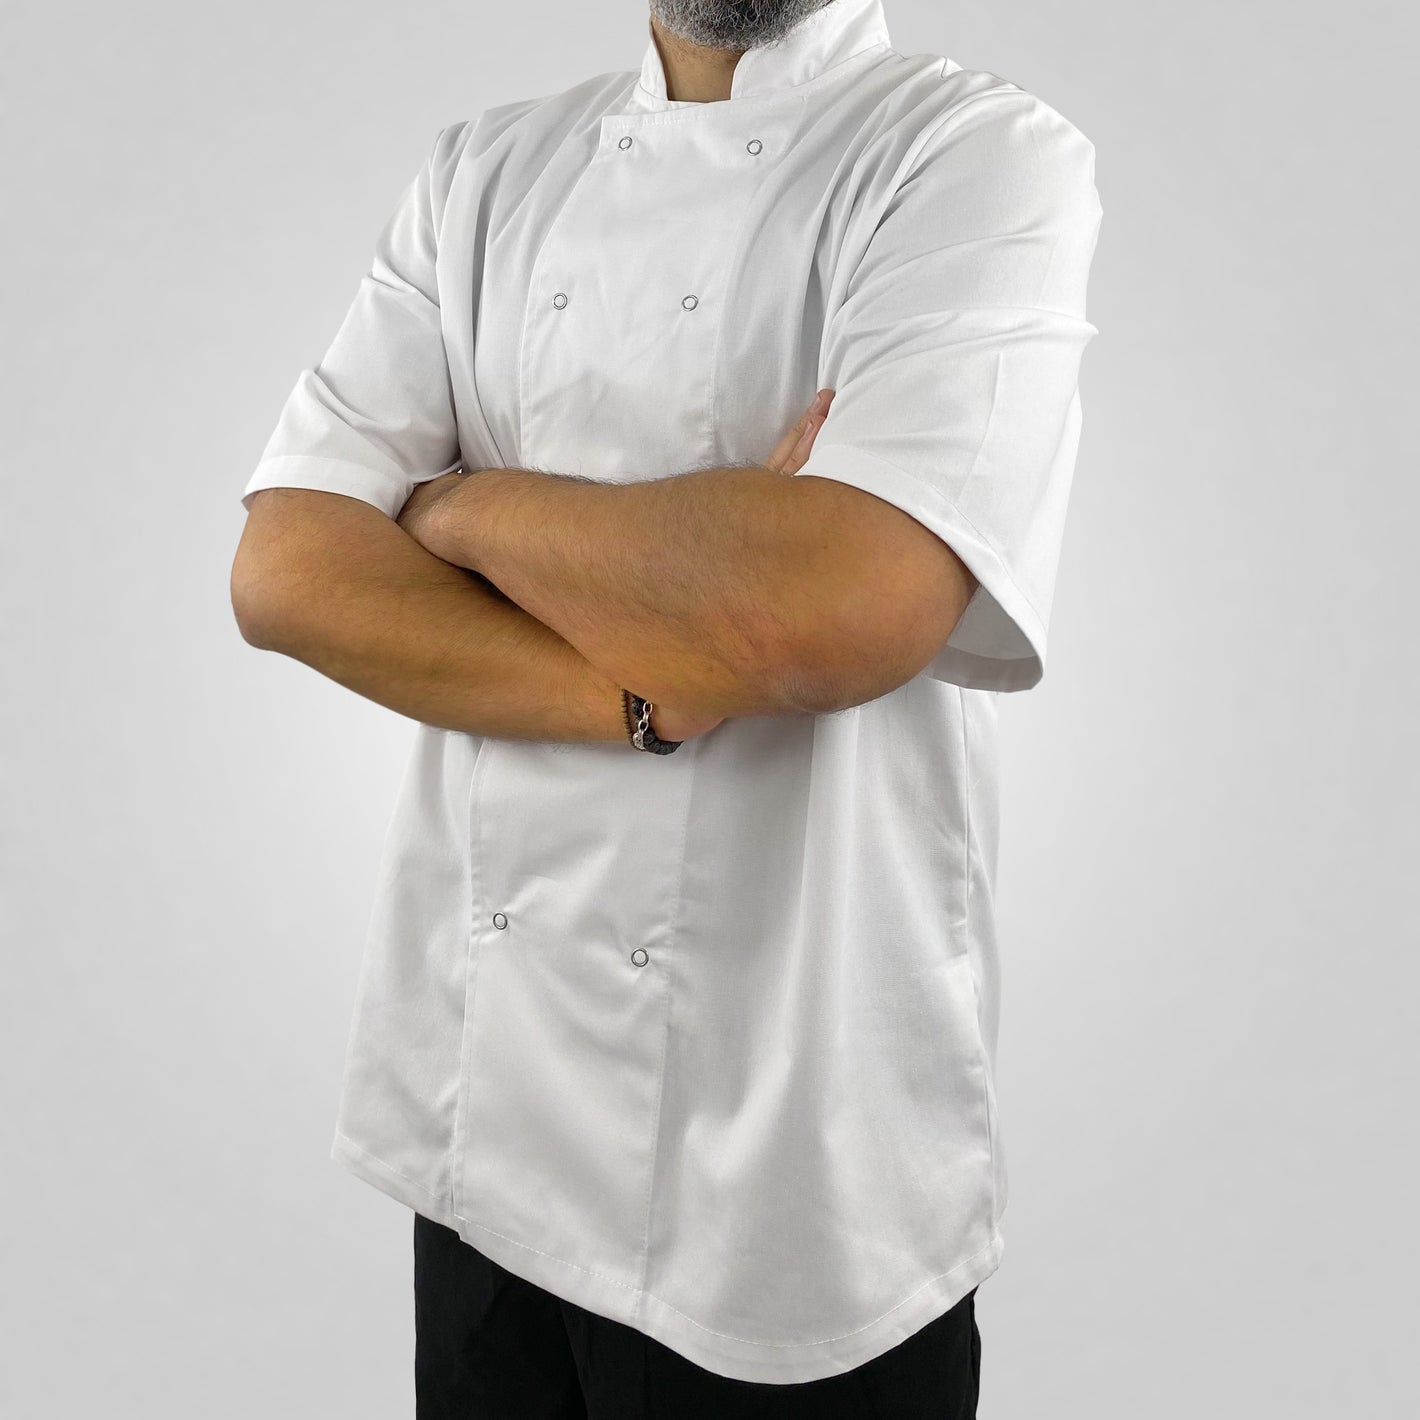 Pegasus Chefwear White Short Sleeve Chef Jacket with Press Studs